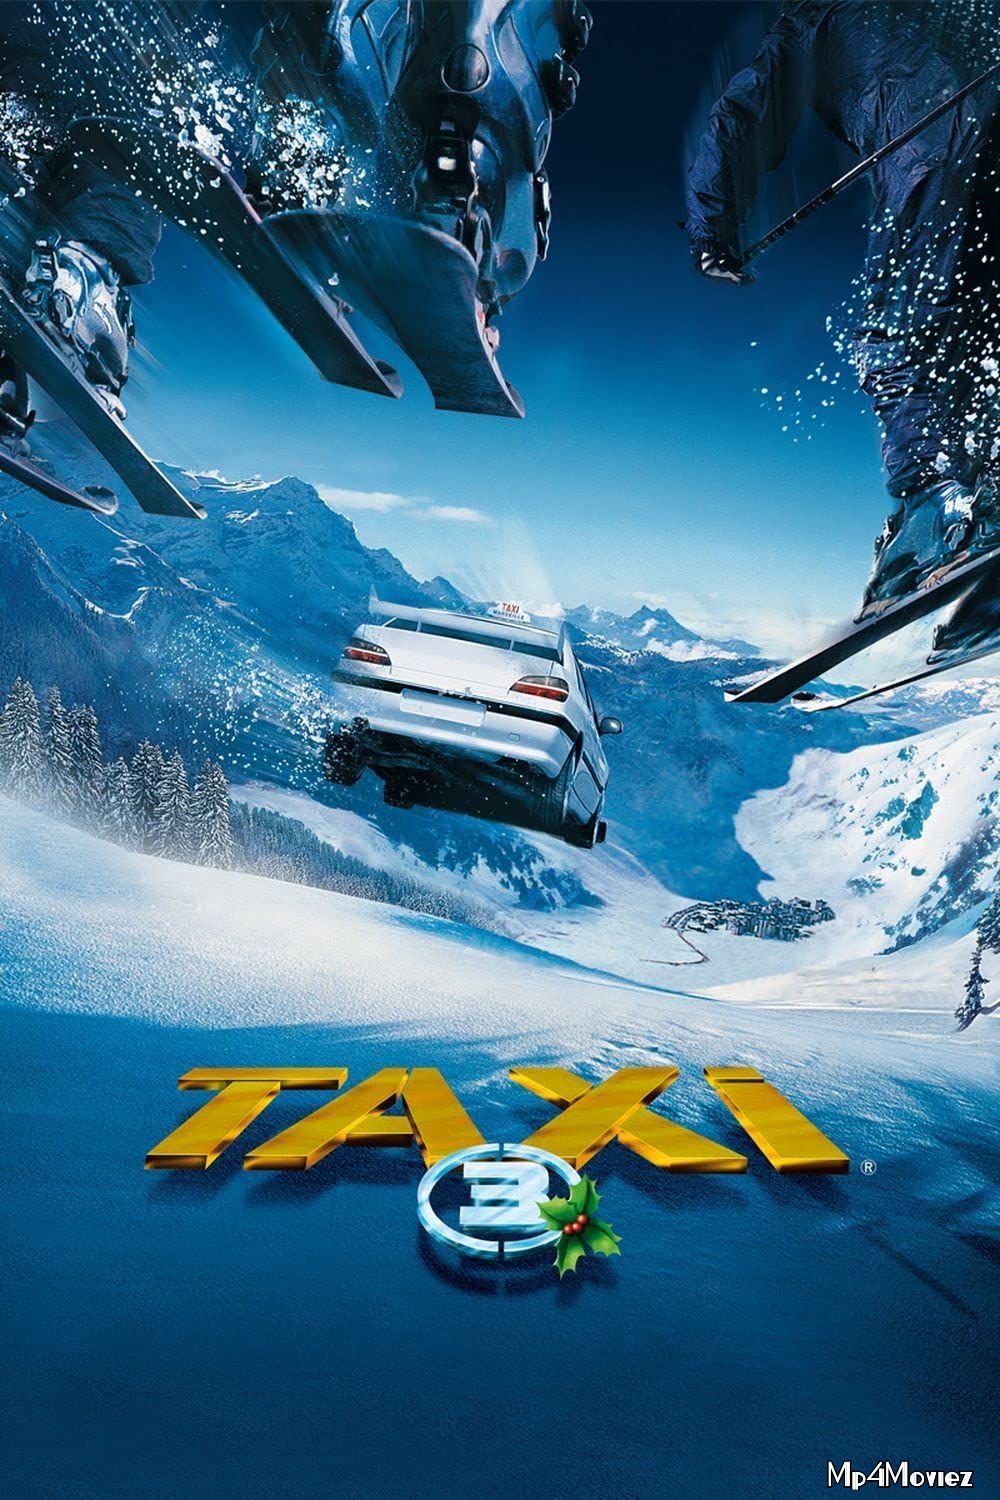 Taxi 3 (2003) Hindi Dubbed Full Movie download full movie